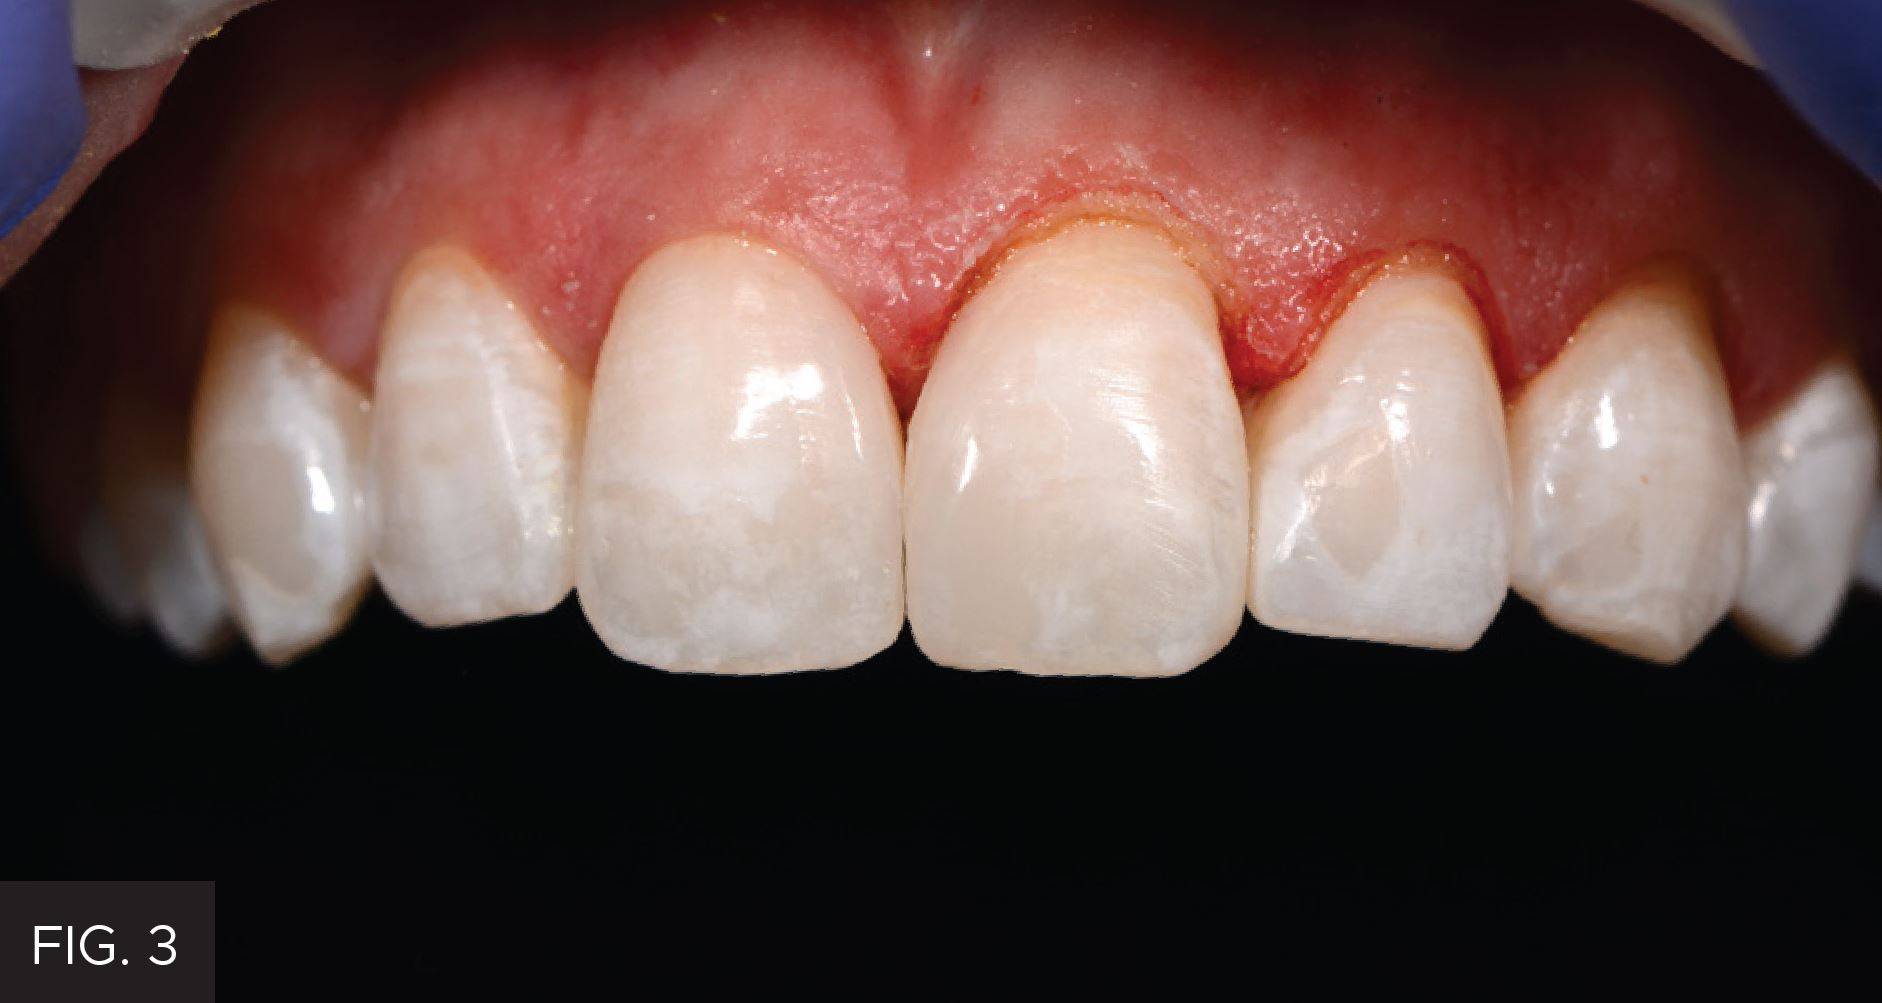 Gingival Sculpting With a Soft Tissue Diode Laser: Figure 3